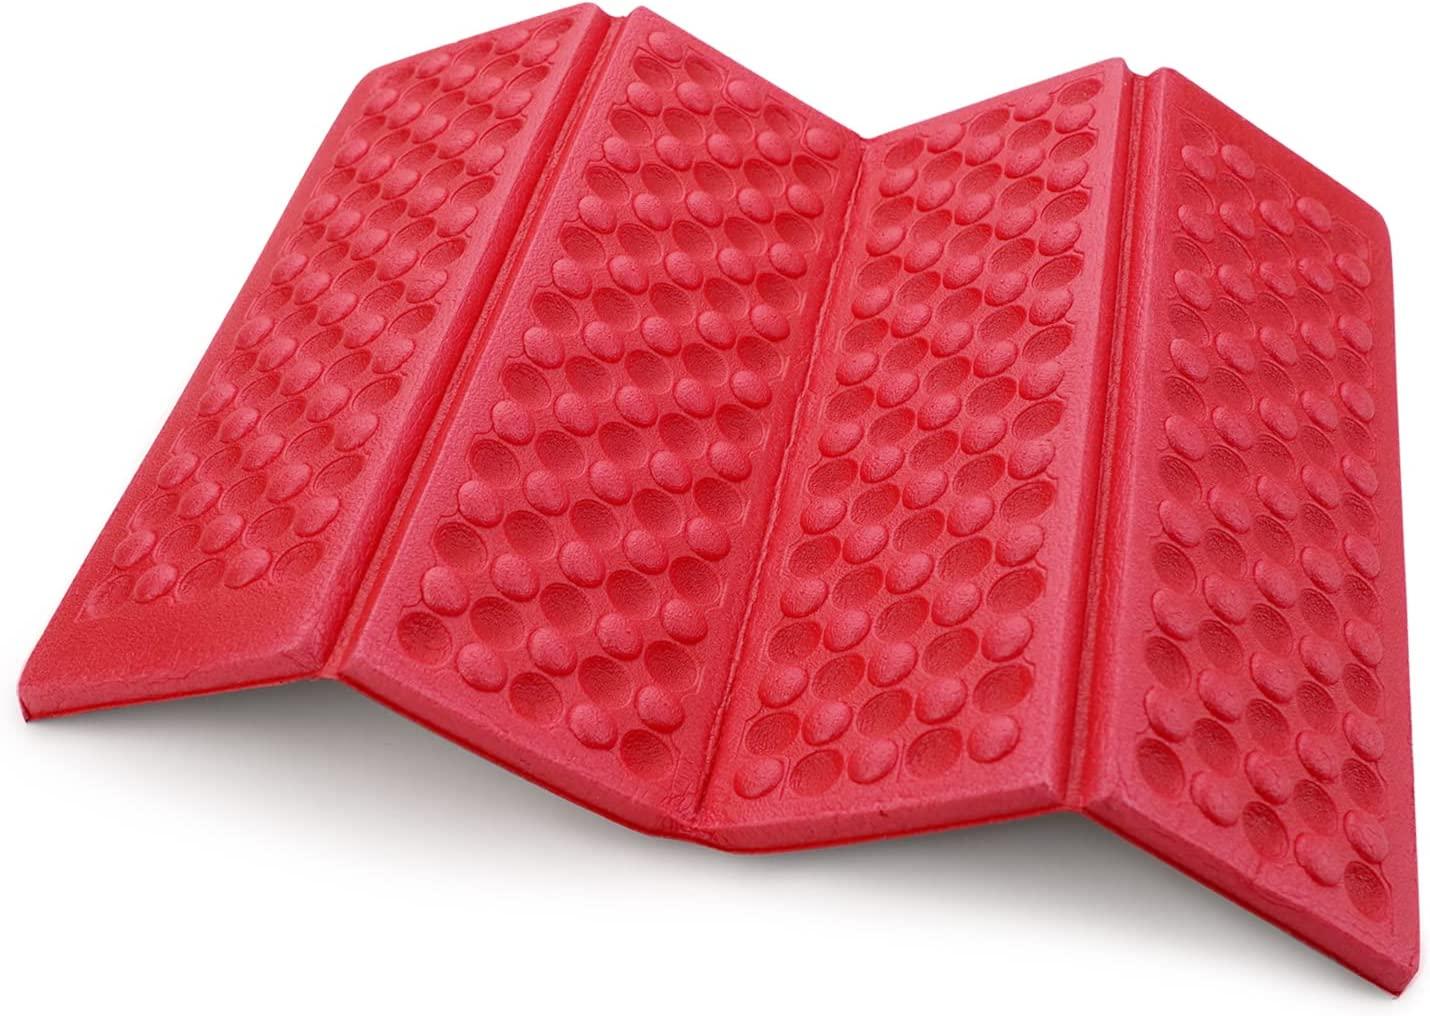 REDCAMP Foam Backpacking Sit Pad 1/2/4 PCS, Ultralight Foldable Z Hiking  Seat Pad Insulated Sitting Pad for Outdoor Camping Stadium Picnic